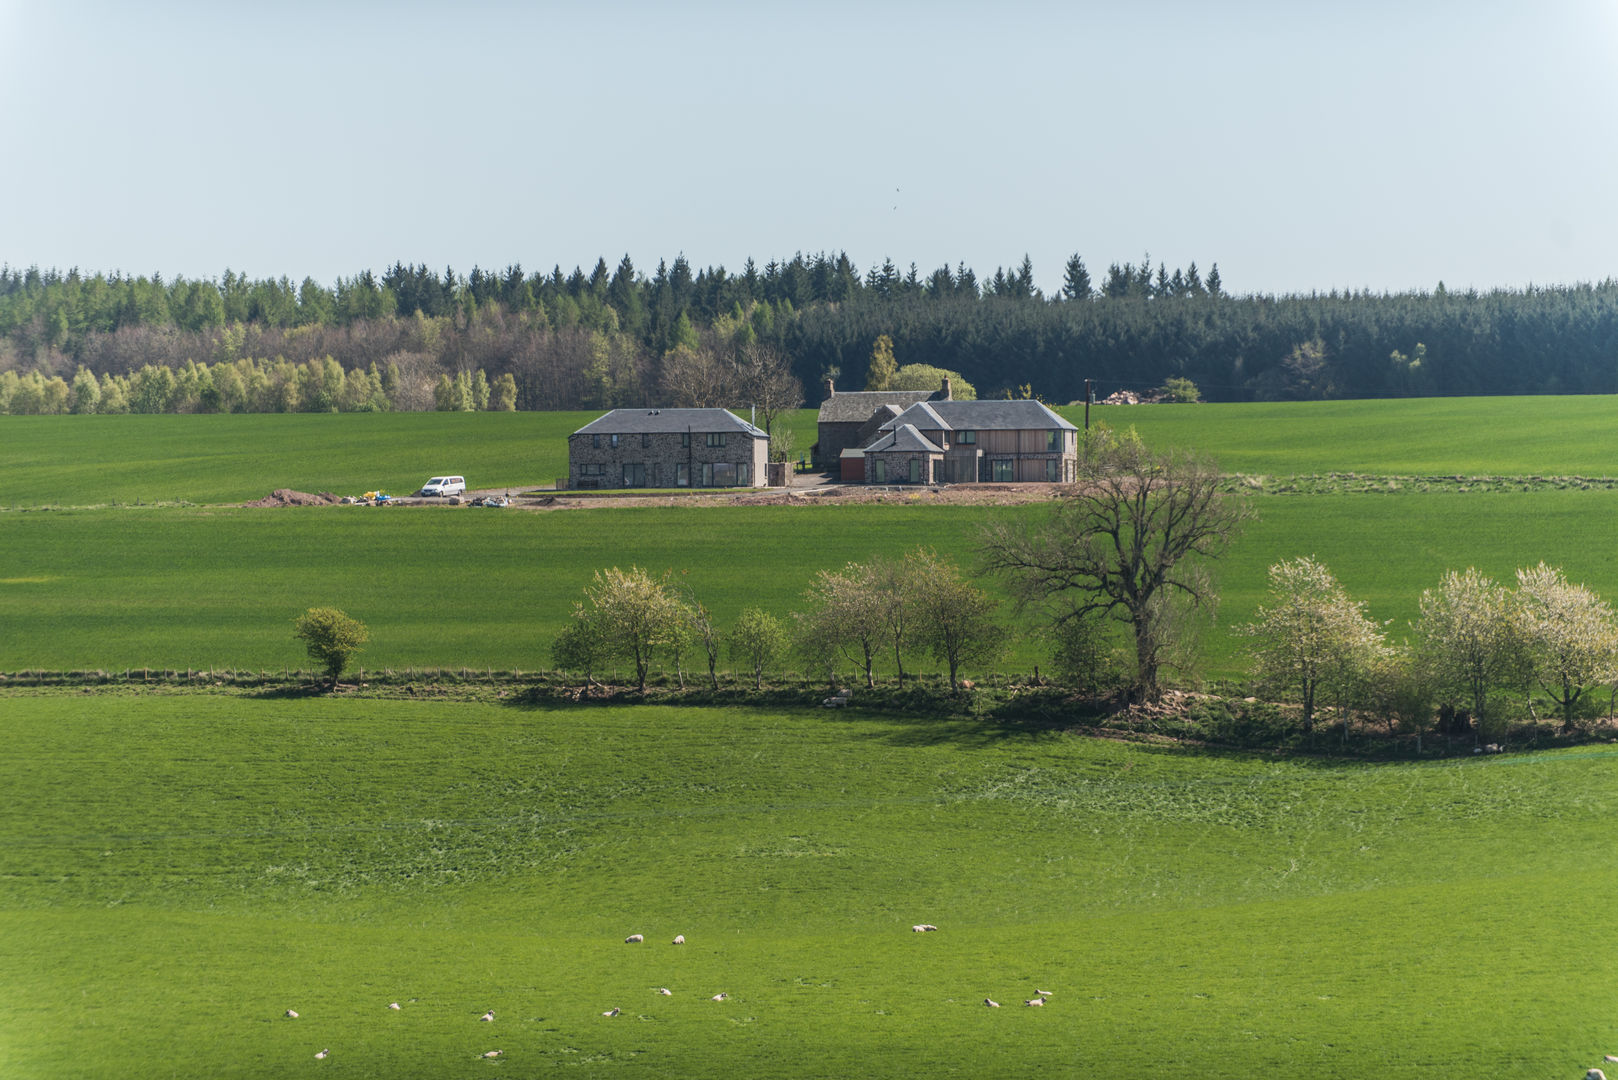 The development sits within the landscape as the former farm steading would Woodside Parker Kirk Architects منازل rural,architecture,farm steading,development,new build,new house,stone house,landscape,countryside,view